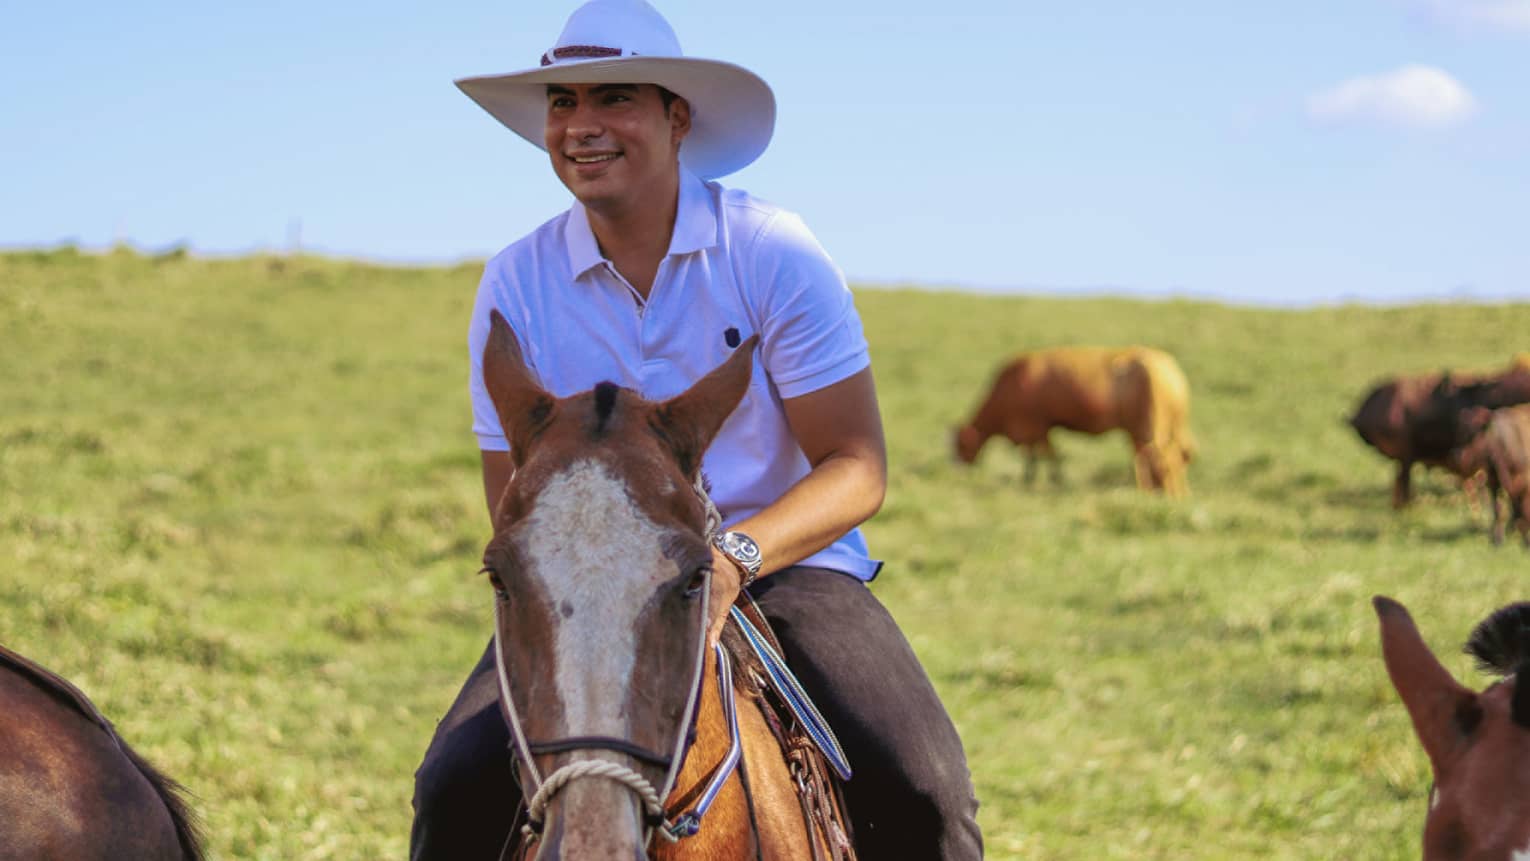 A grinning horseback rider in a white cowboy hat rides through a vast plain of green grass, cattle grazing in the background.